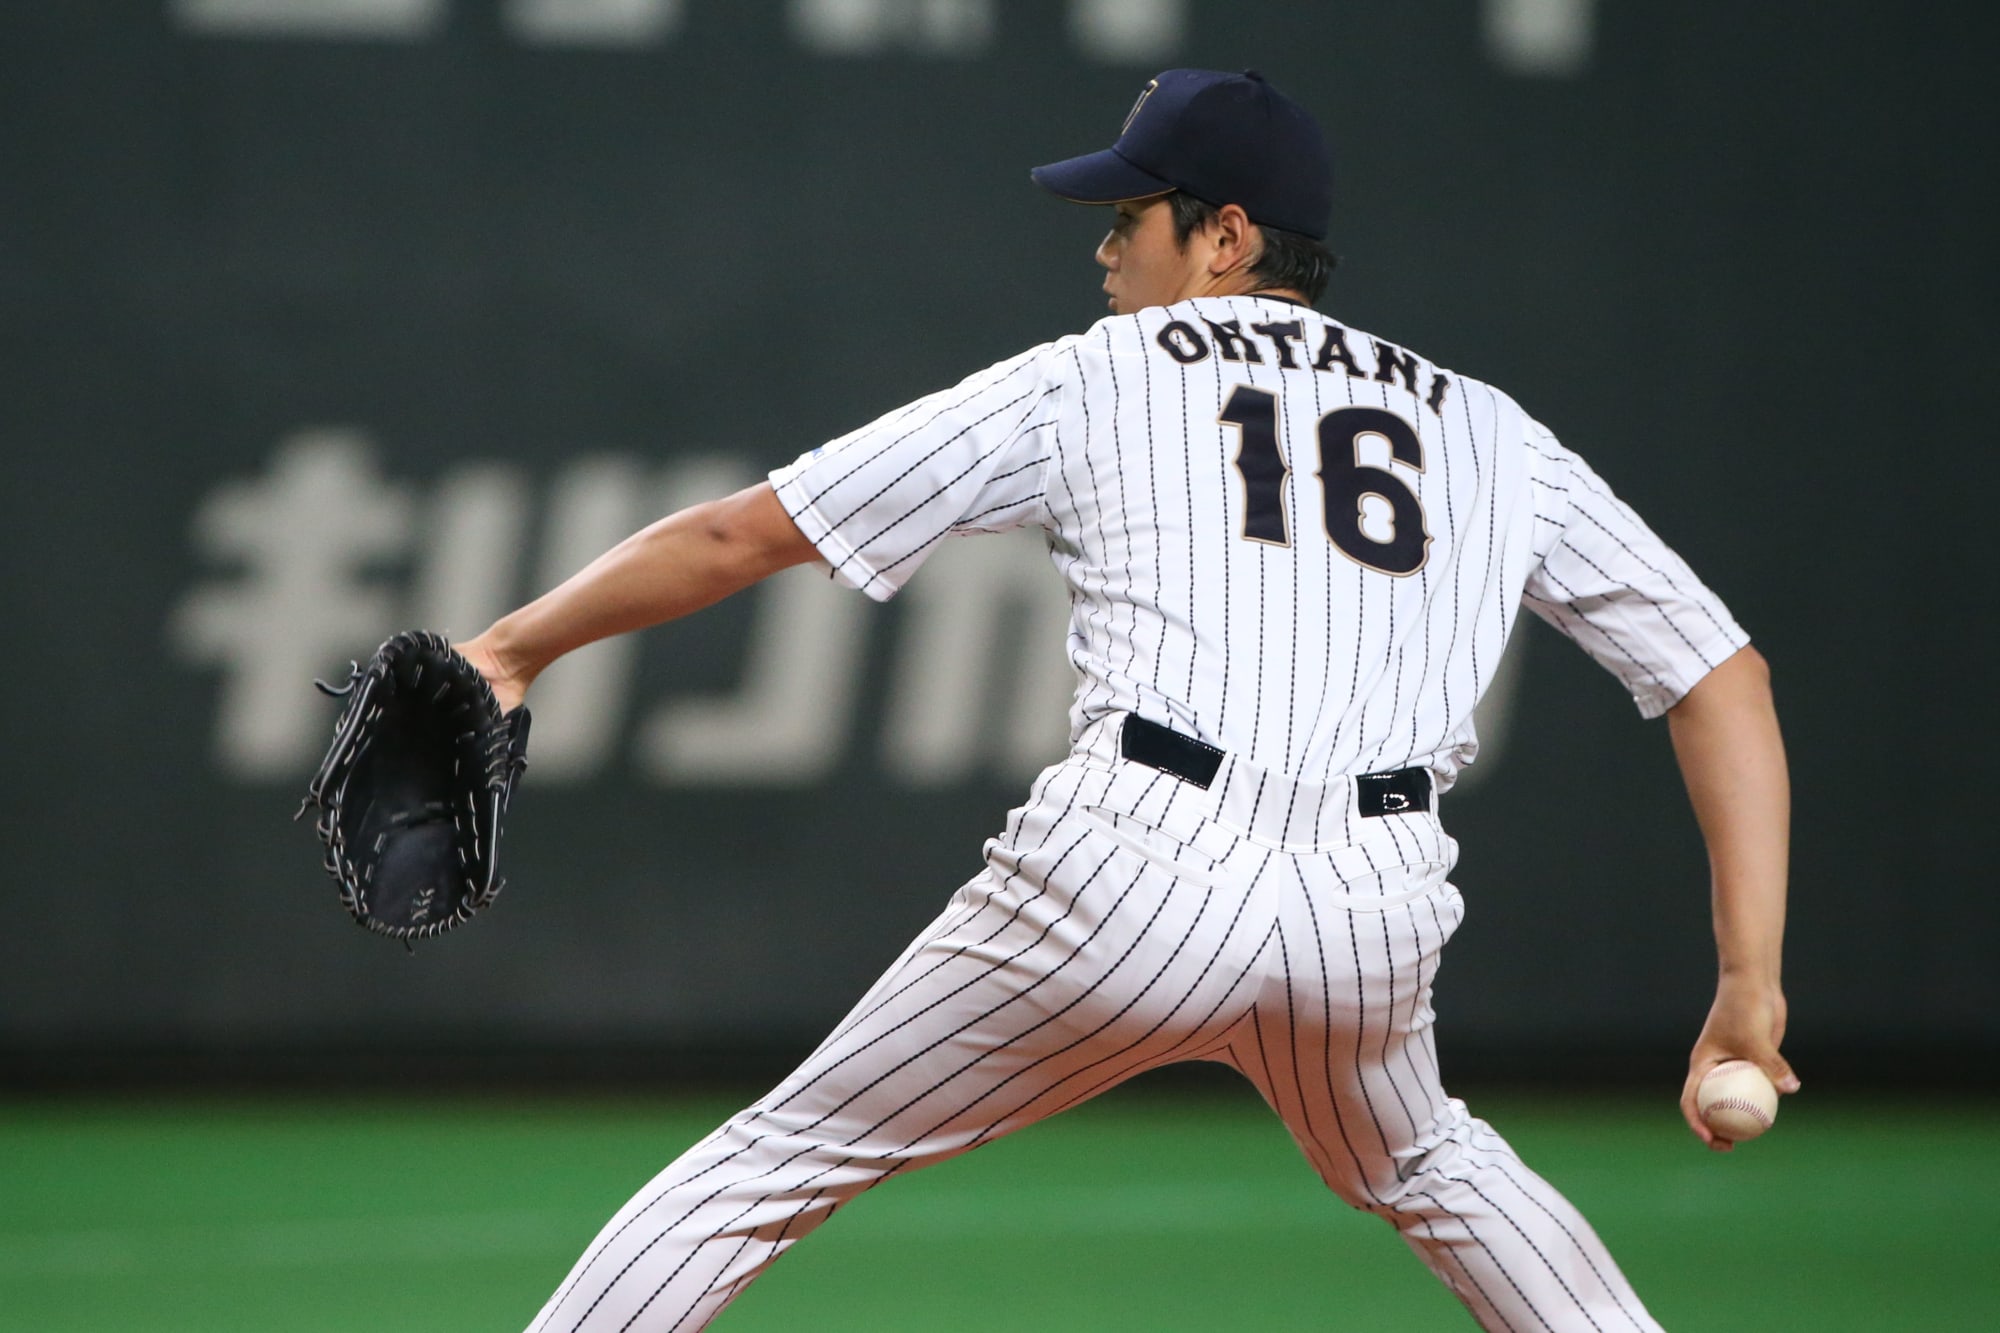 Shohei Ohtani or Otani? Which is it?